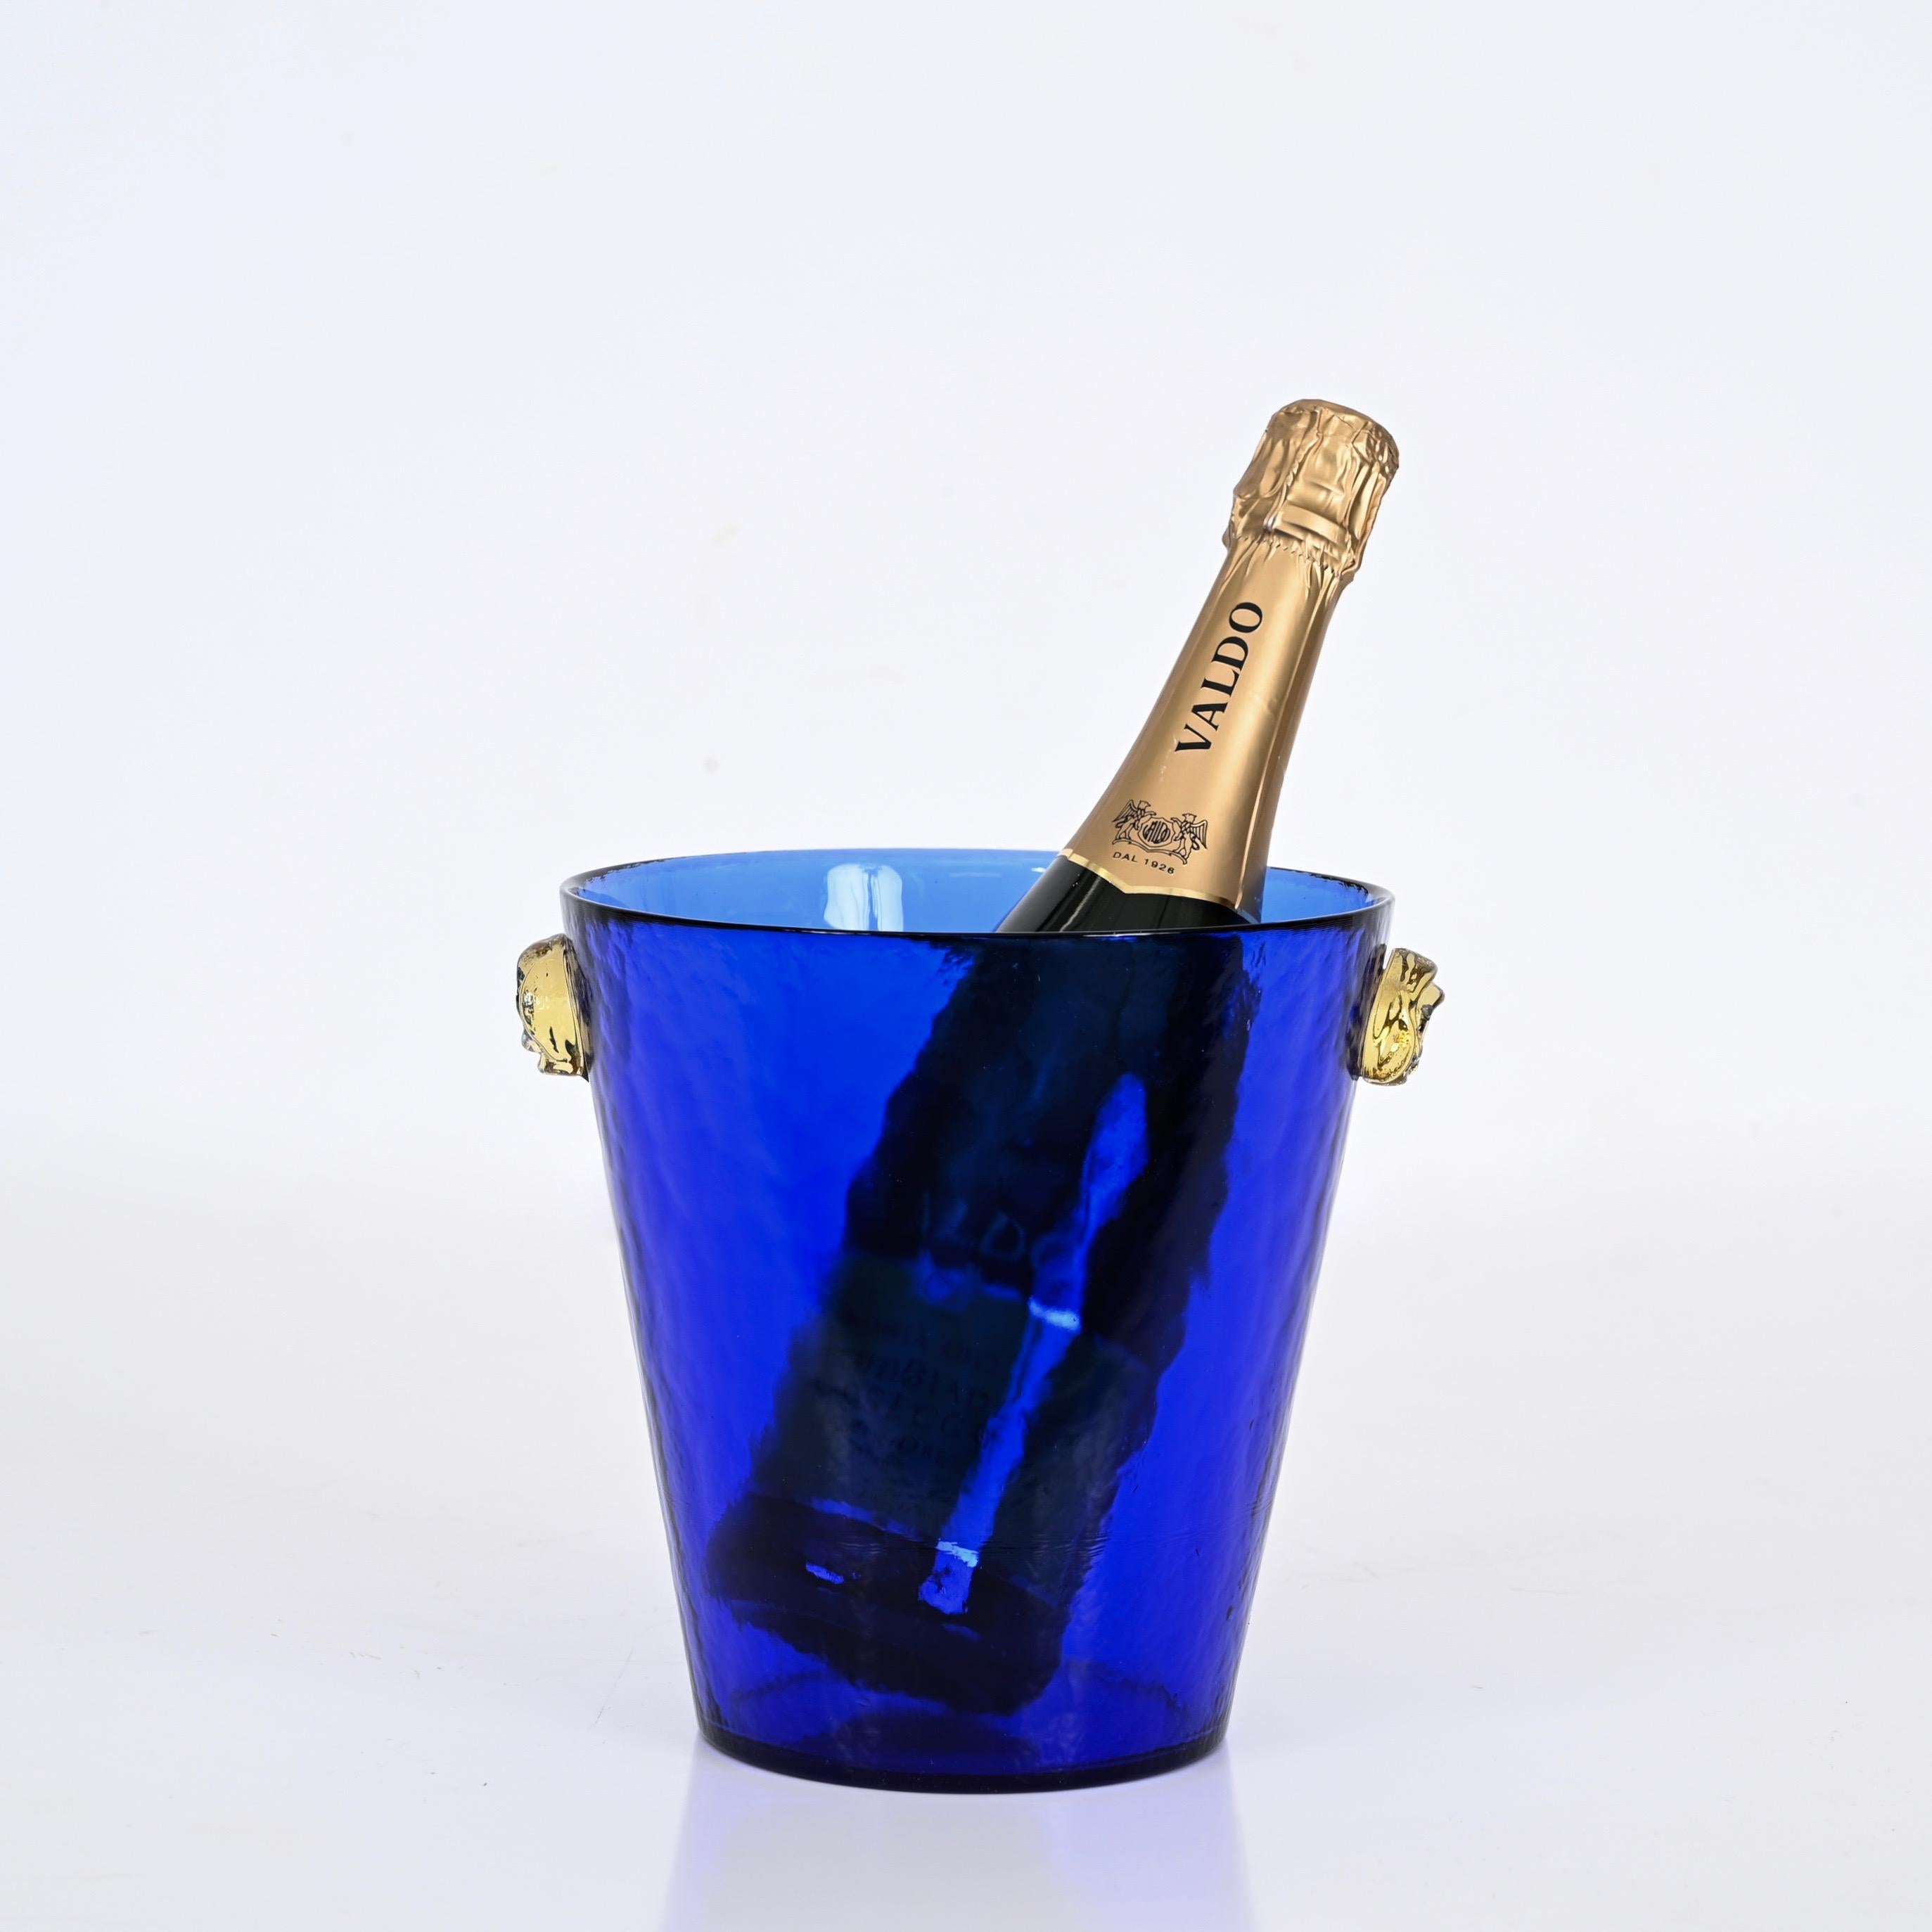 Stunning Ice Bucket in blue Murano glass with gold glass handles. This gorgeous piece was made in Murano, Italy in the 1960s.

This ice bucket is made in an incredibly vibrant blue glass and is completed by two wonderful rose-shaped handles with